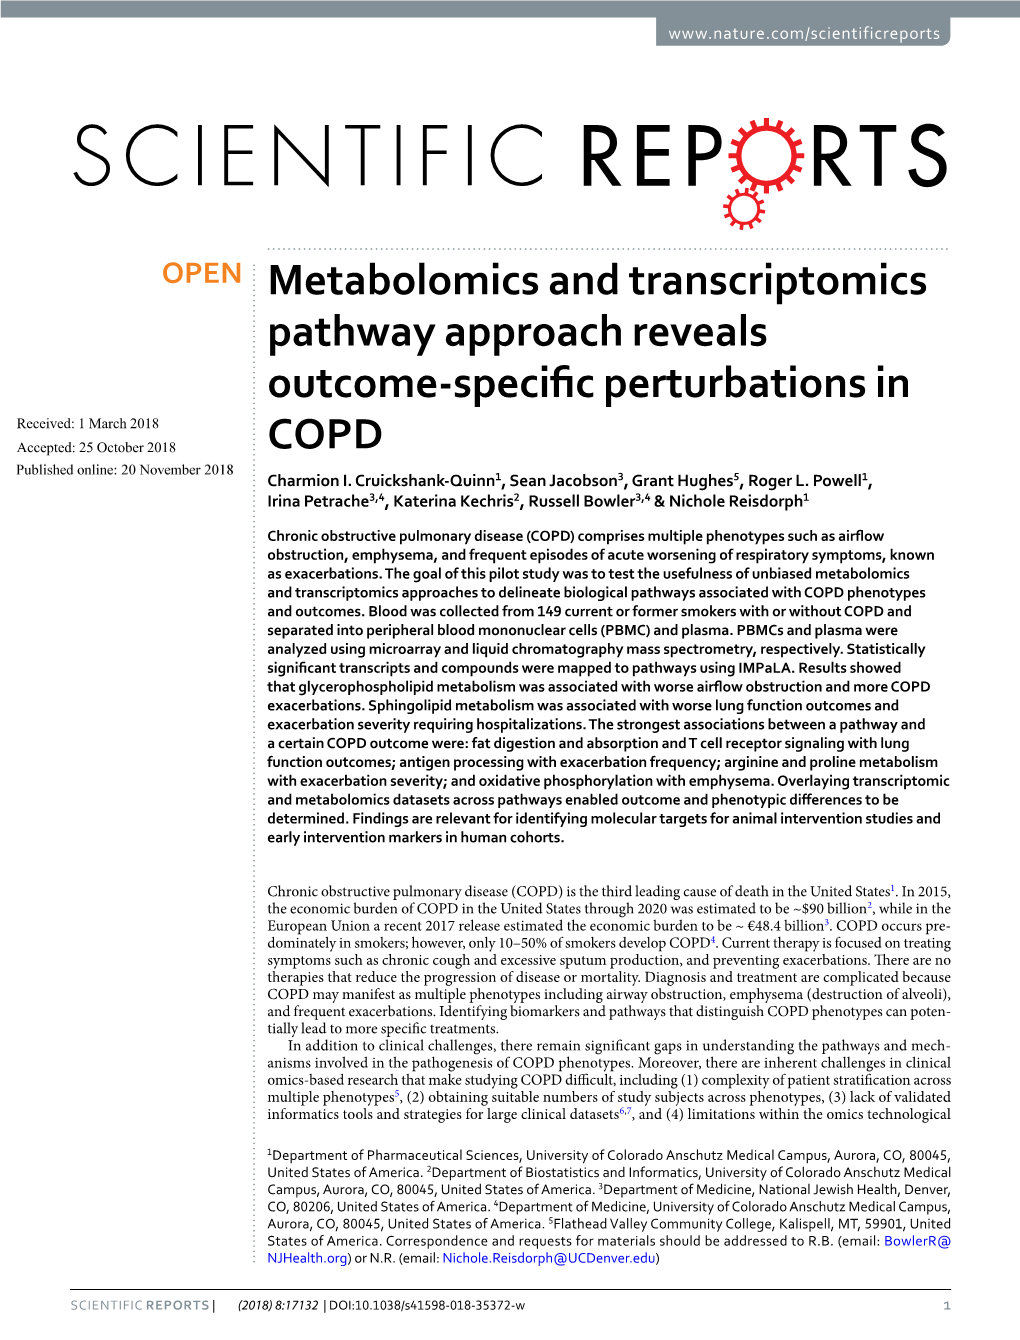 Metabolomics and Transcriptomics Pathway Approach Reveals Outcome